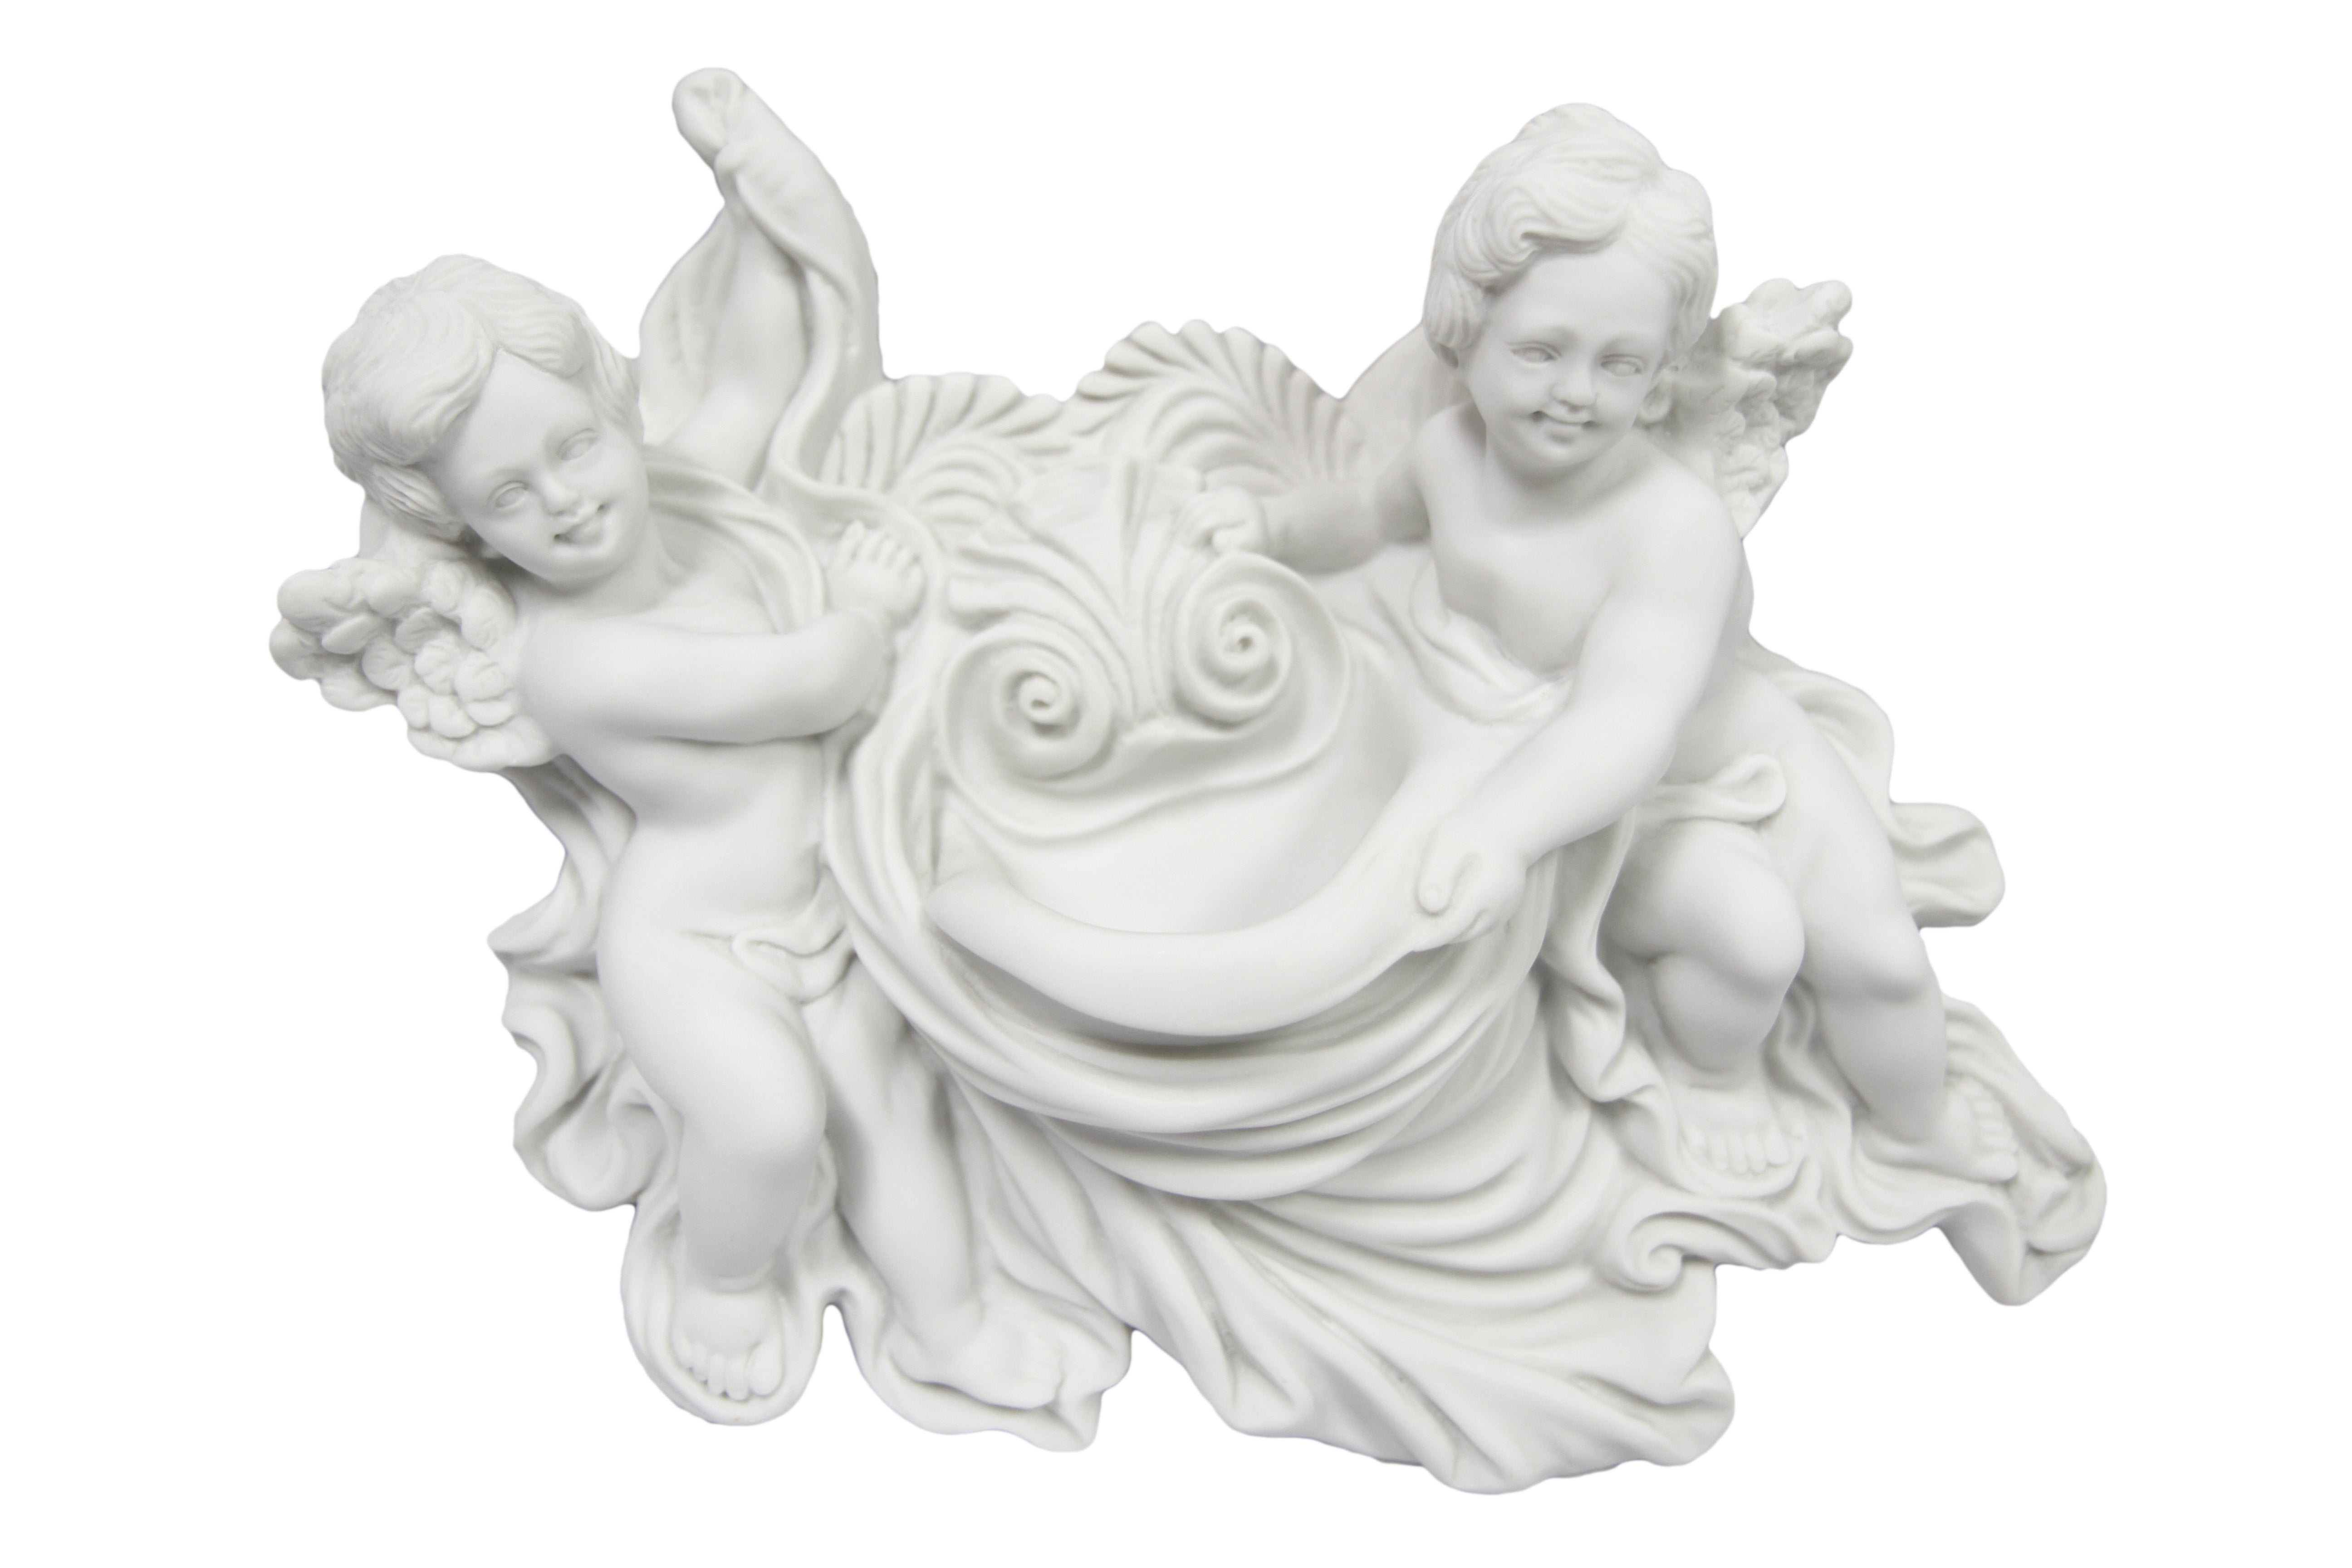 Holy Water Font Cherub Guardian Angels Wall Hanging Catholic Statue Vittoria Collection Made in Italy